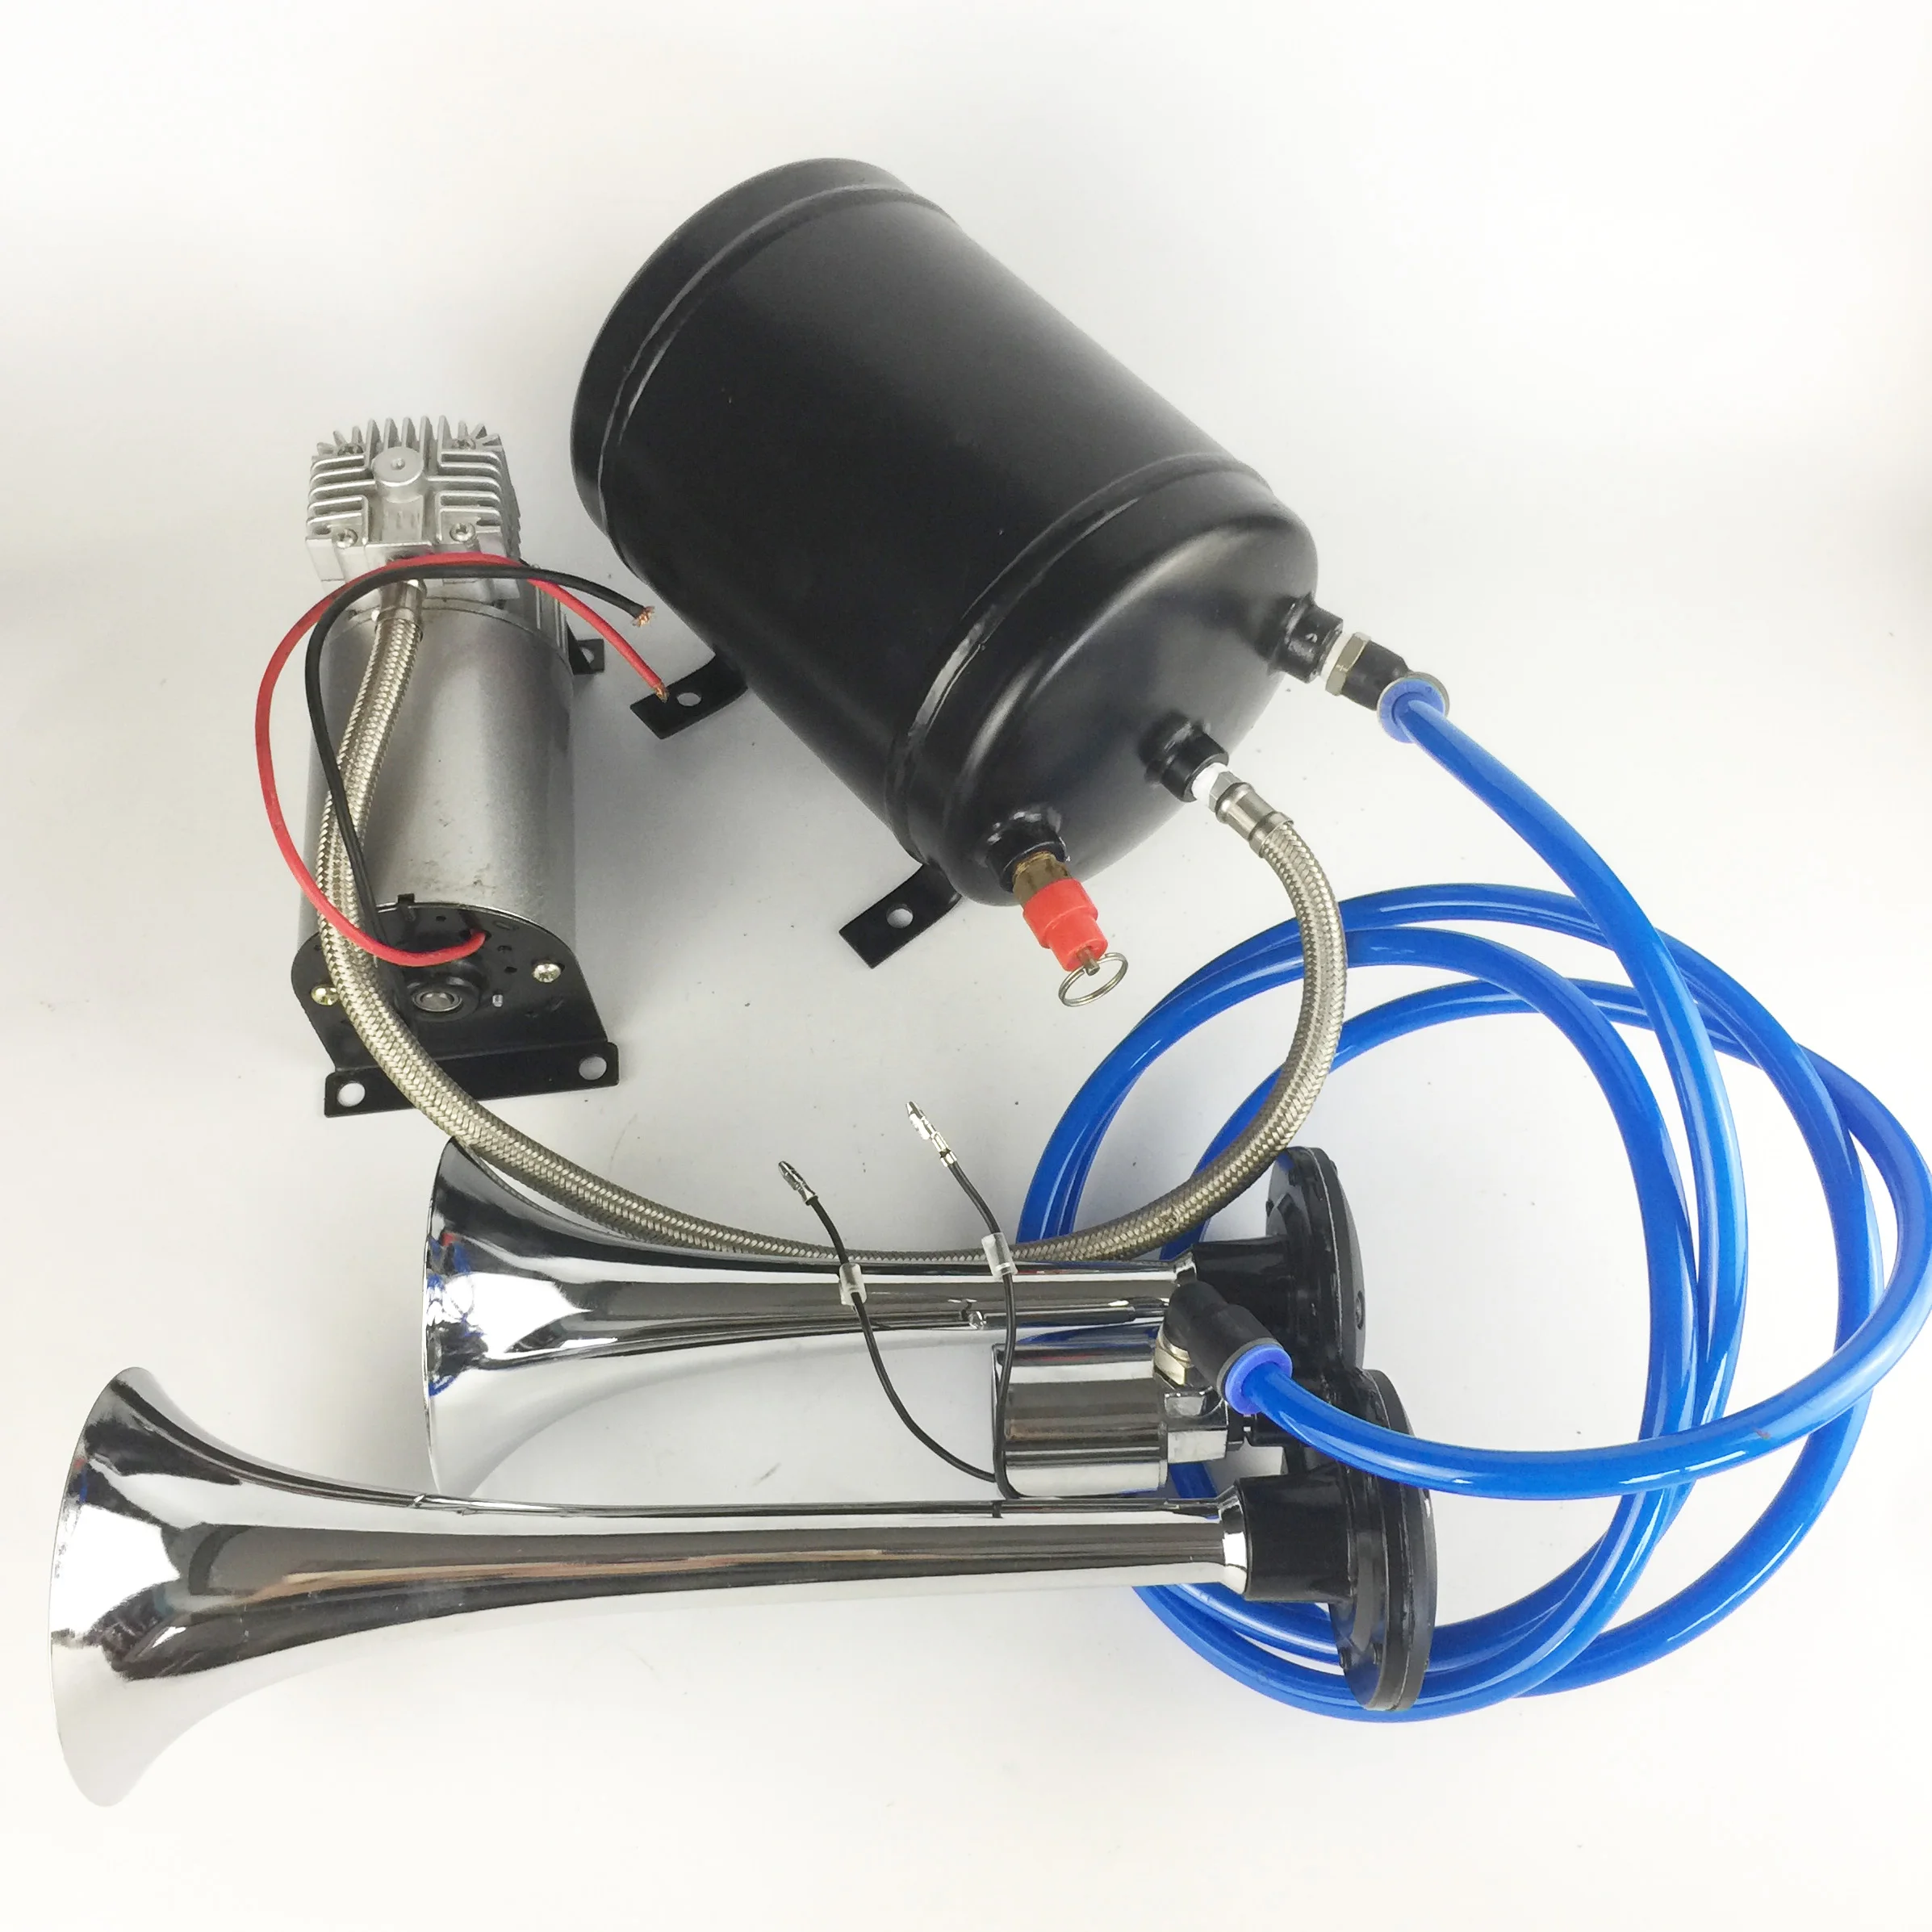 

Air Horn, Chrome Zinc Dual Trumpet Air Horn with Compressor for Any 12V Vehicles Trucks Lorrys Trains Boats Cars Vans